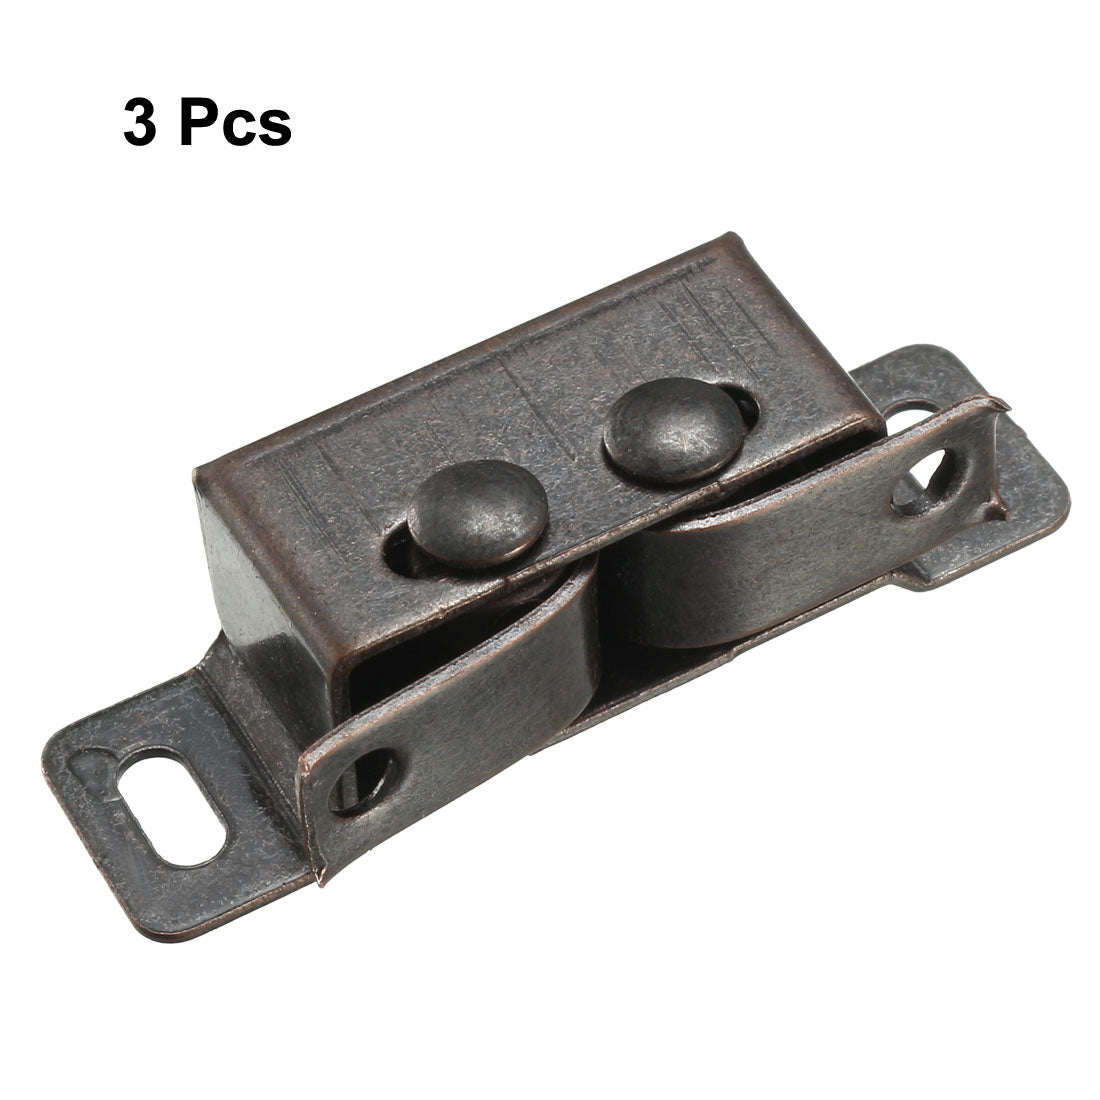 uxcell Uxcell Retro Wardrobe Door Iron Double Ball Roller Catch Latch, Copper Tone 3 Pcs